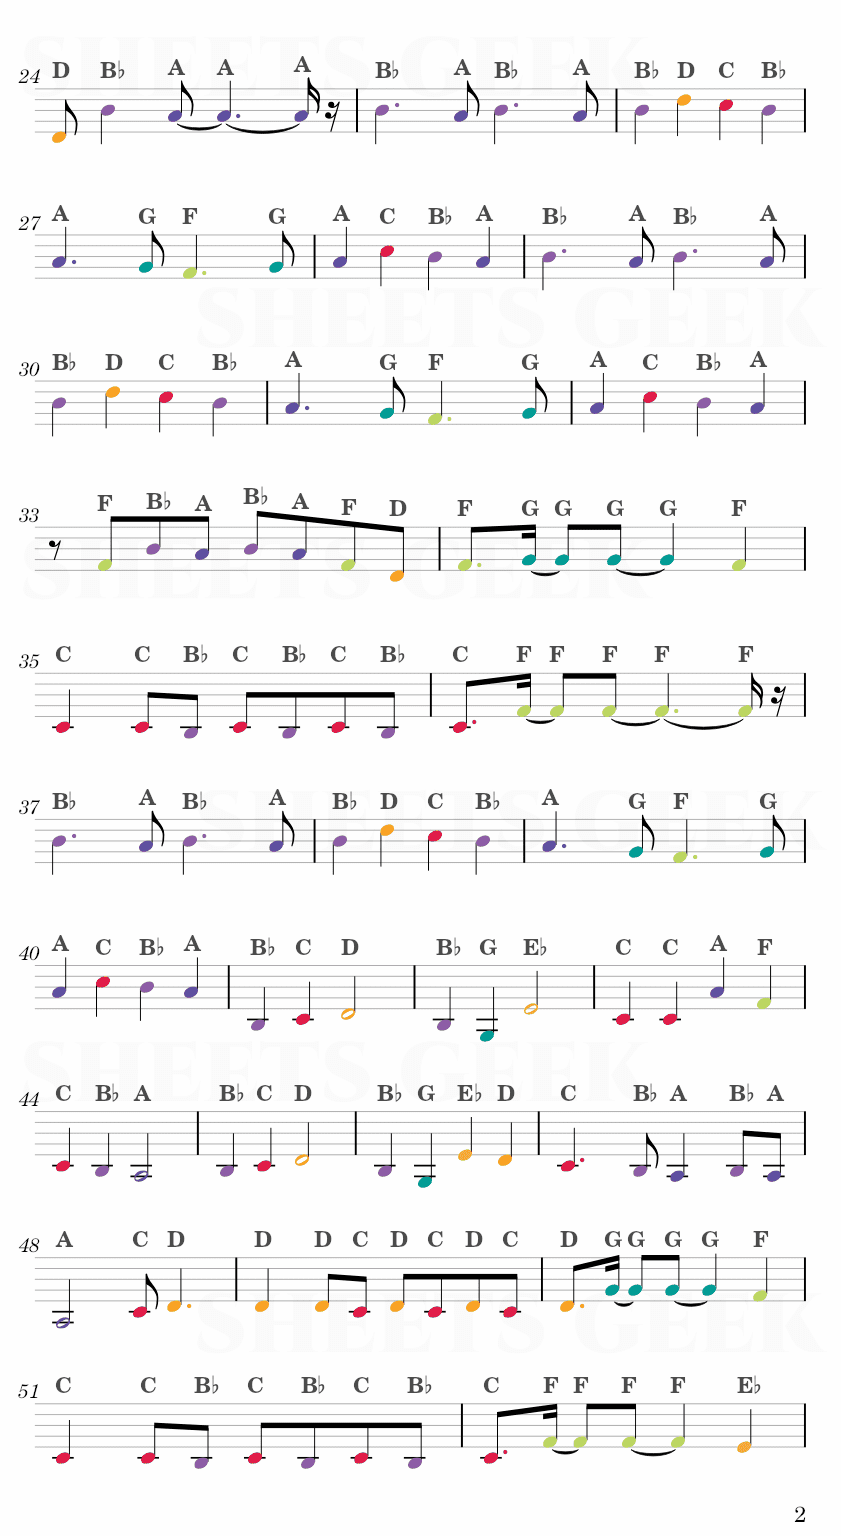 Different World - Alan Walker, K-391 & Sofia Carson feat. CORSAK Easy Sheet Music Free for piano, keyboard, flute, violin, sax, cello page 2